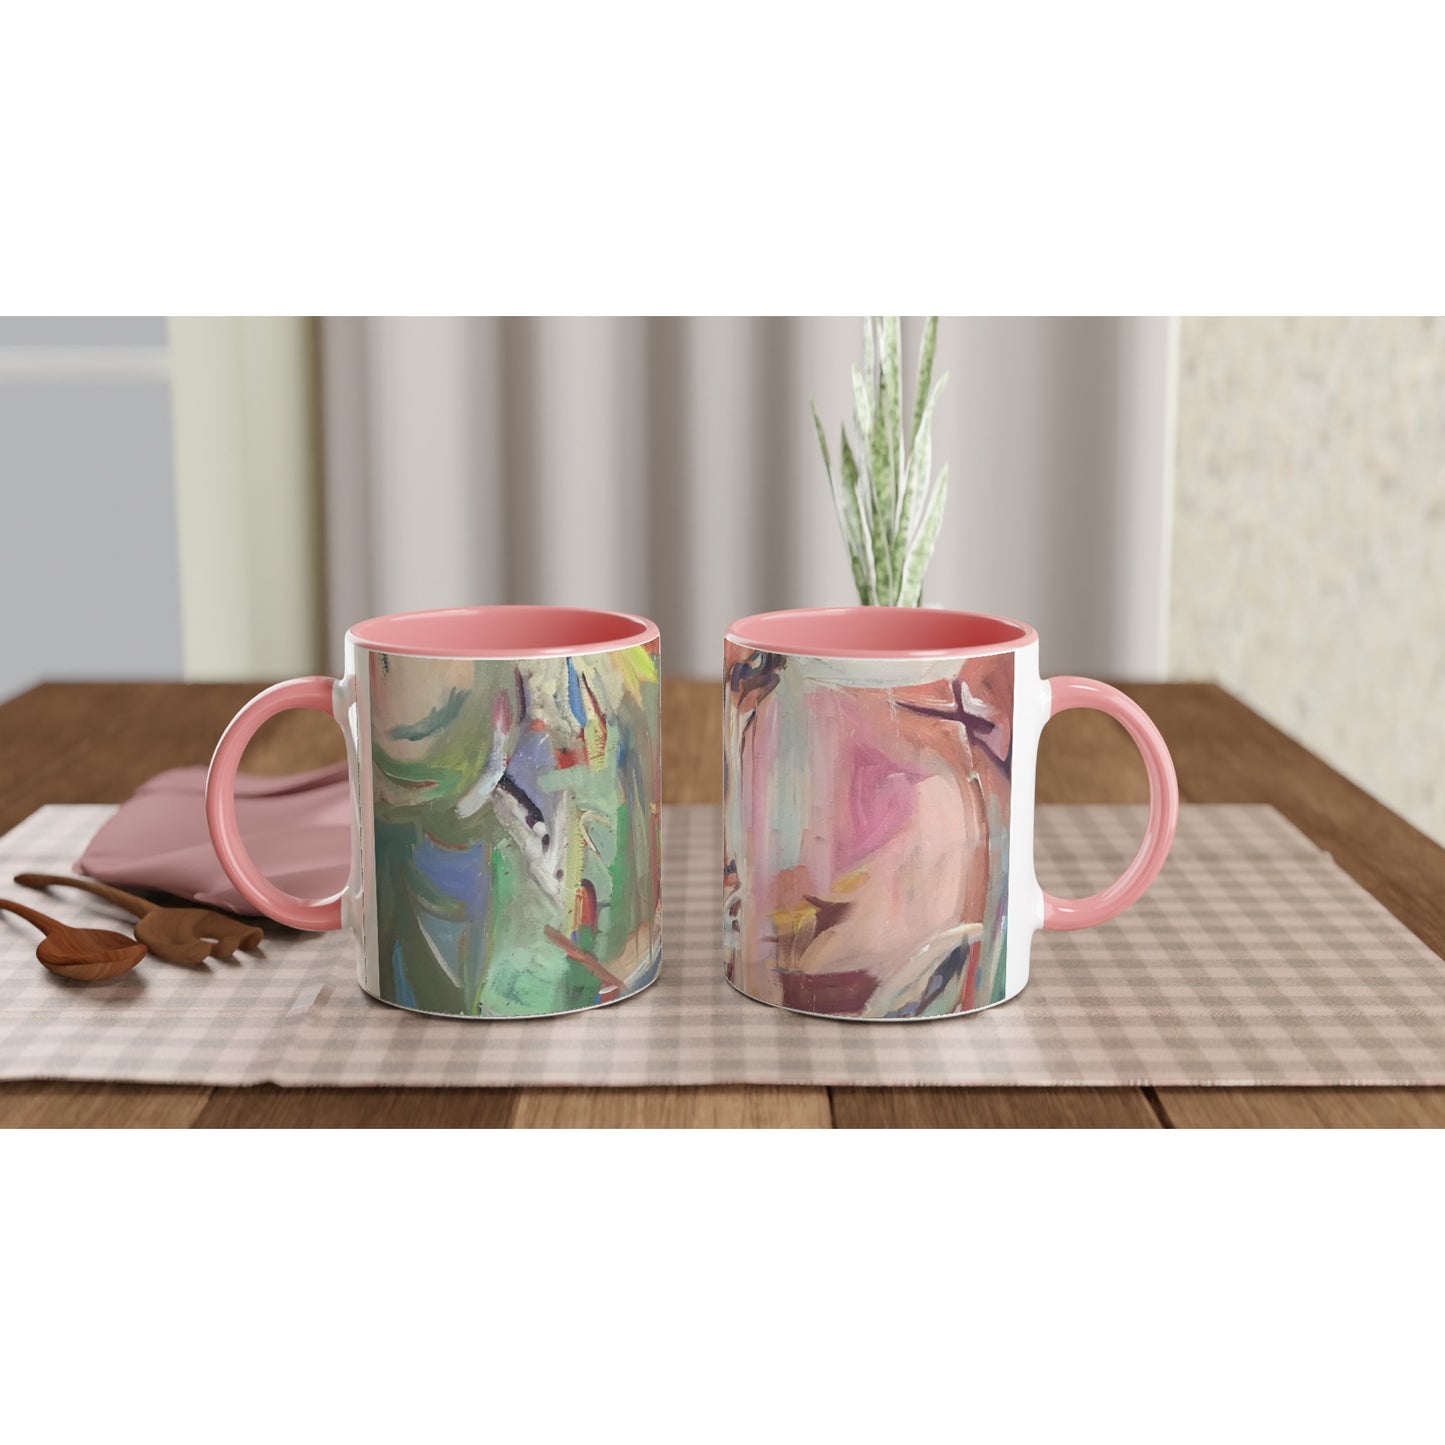 "All Seasons" White 11oz Ceramic Mug with Color Inside by Barbara Cleary Designs